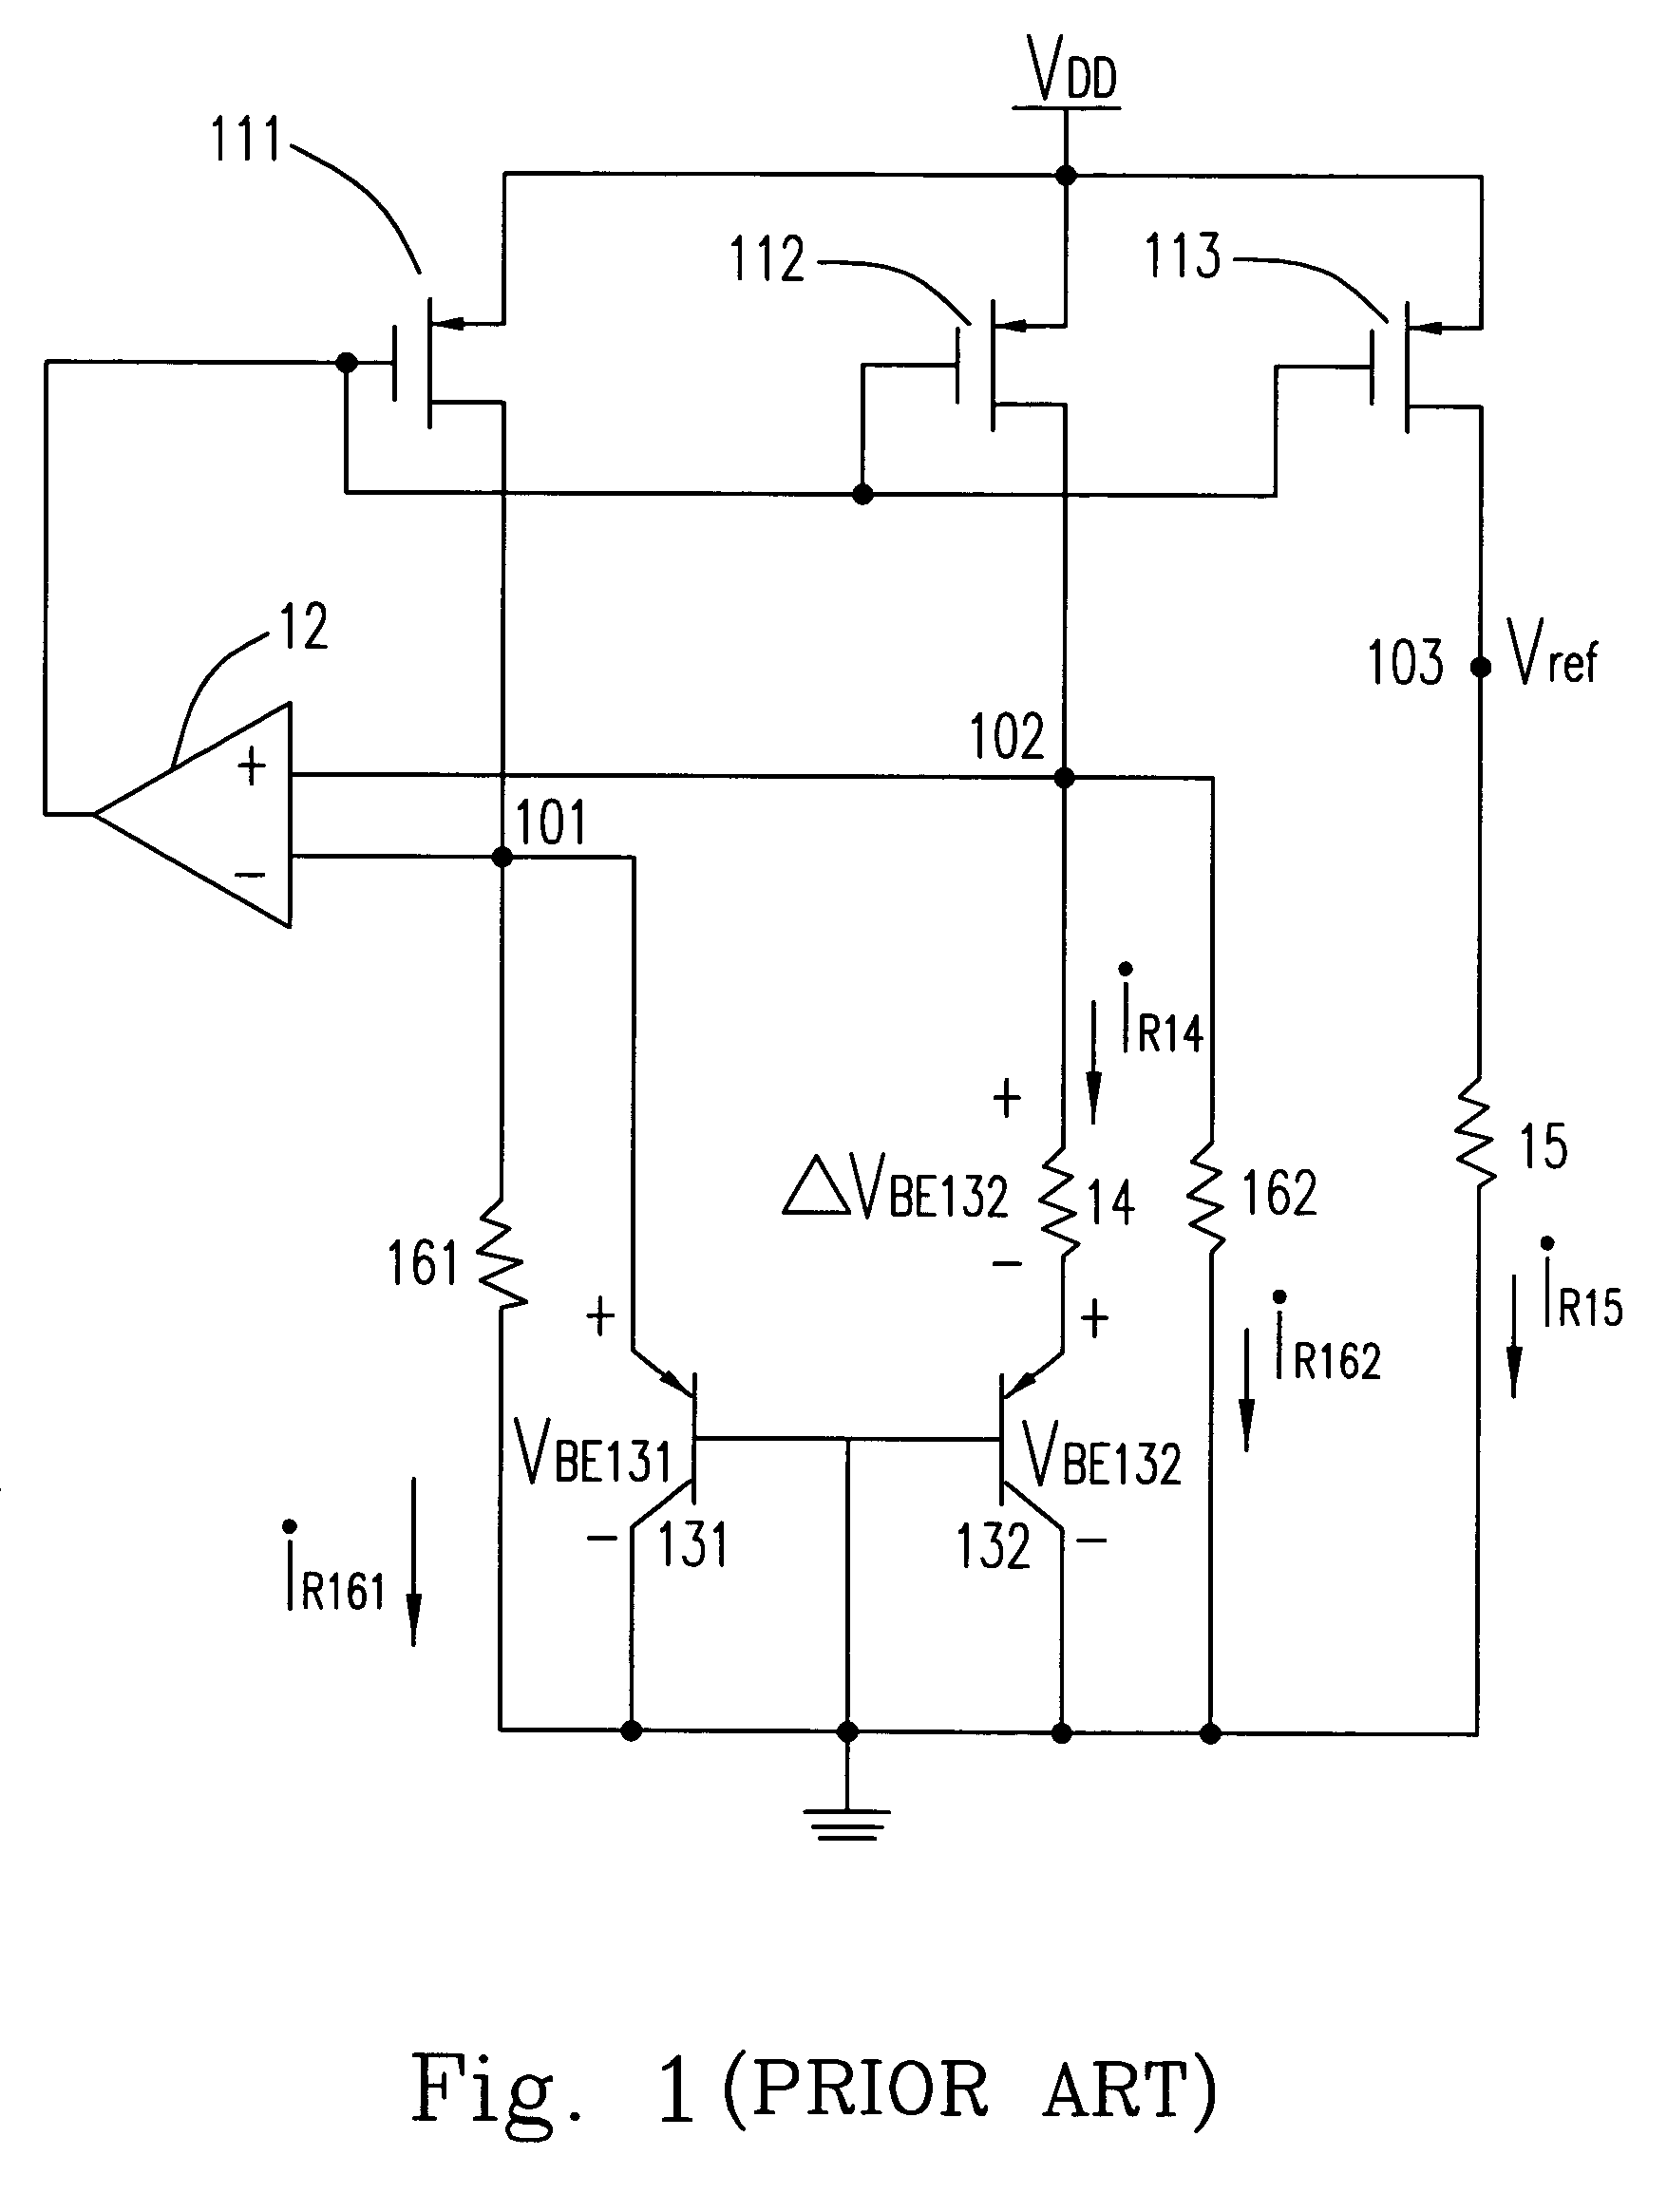 Low-power bandgap reference circuits having relatively less components